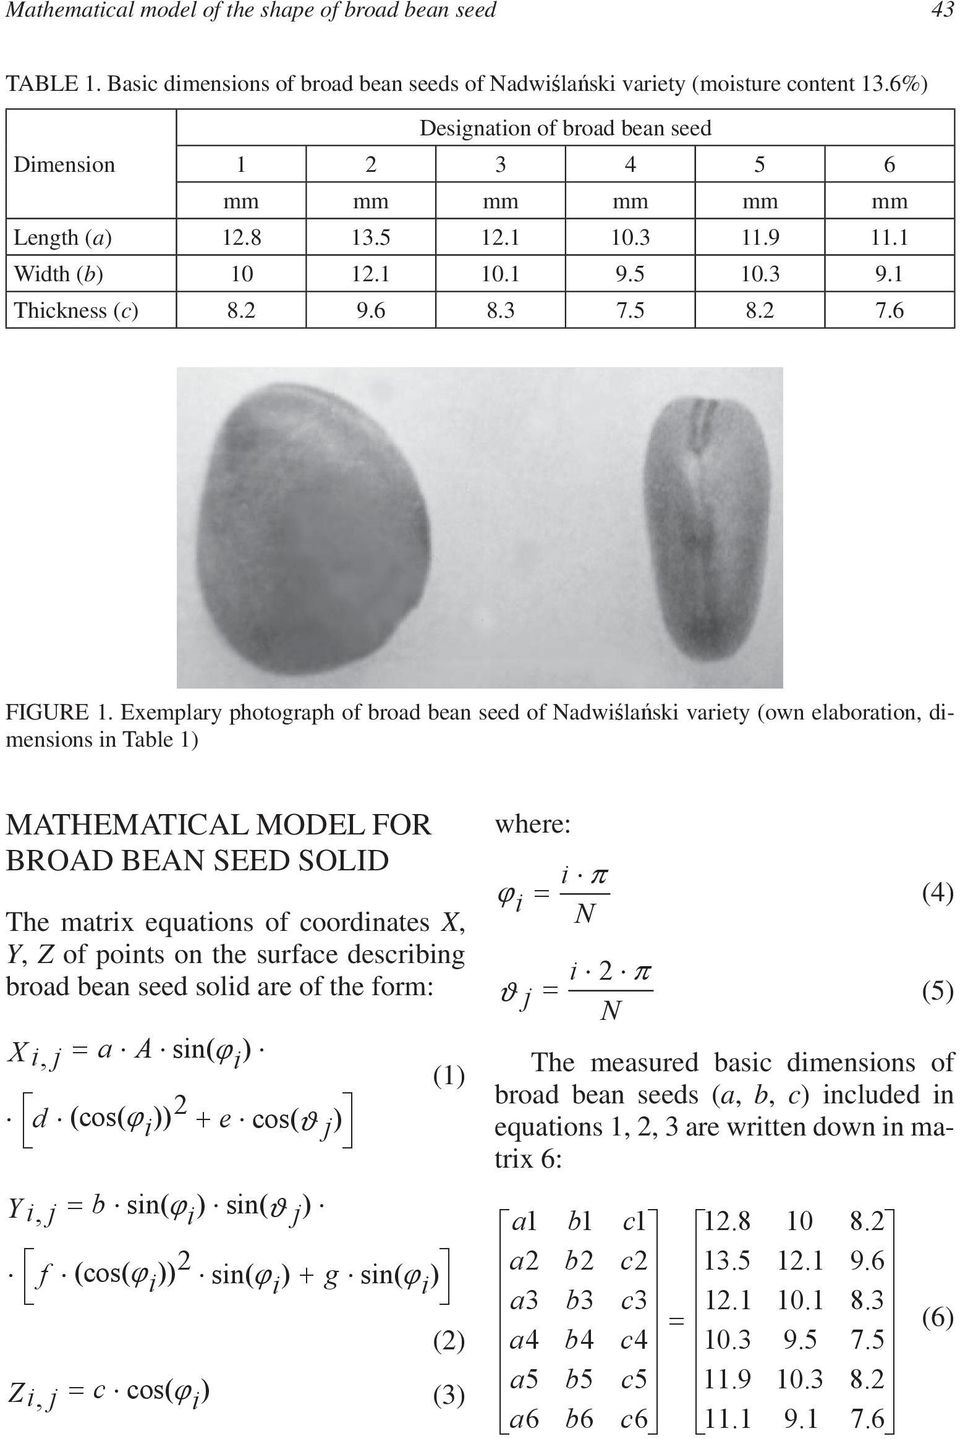 Exemplary photograph of broad bean seed of Nadwilaski variety (own elaboration, dimensions in Table 1) MATHEMATICAL MODEL FOR BROAD BEAN SEED SOLID The matrix equations of coordinates X, Y, Z of